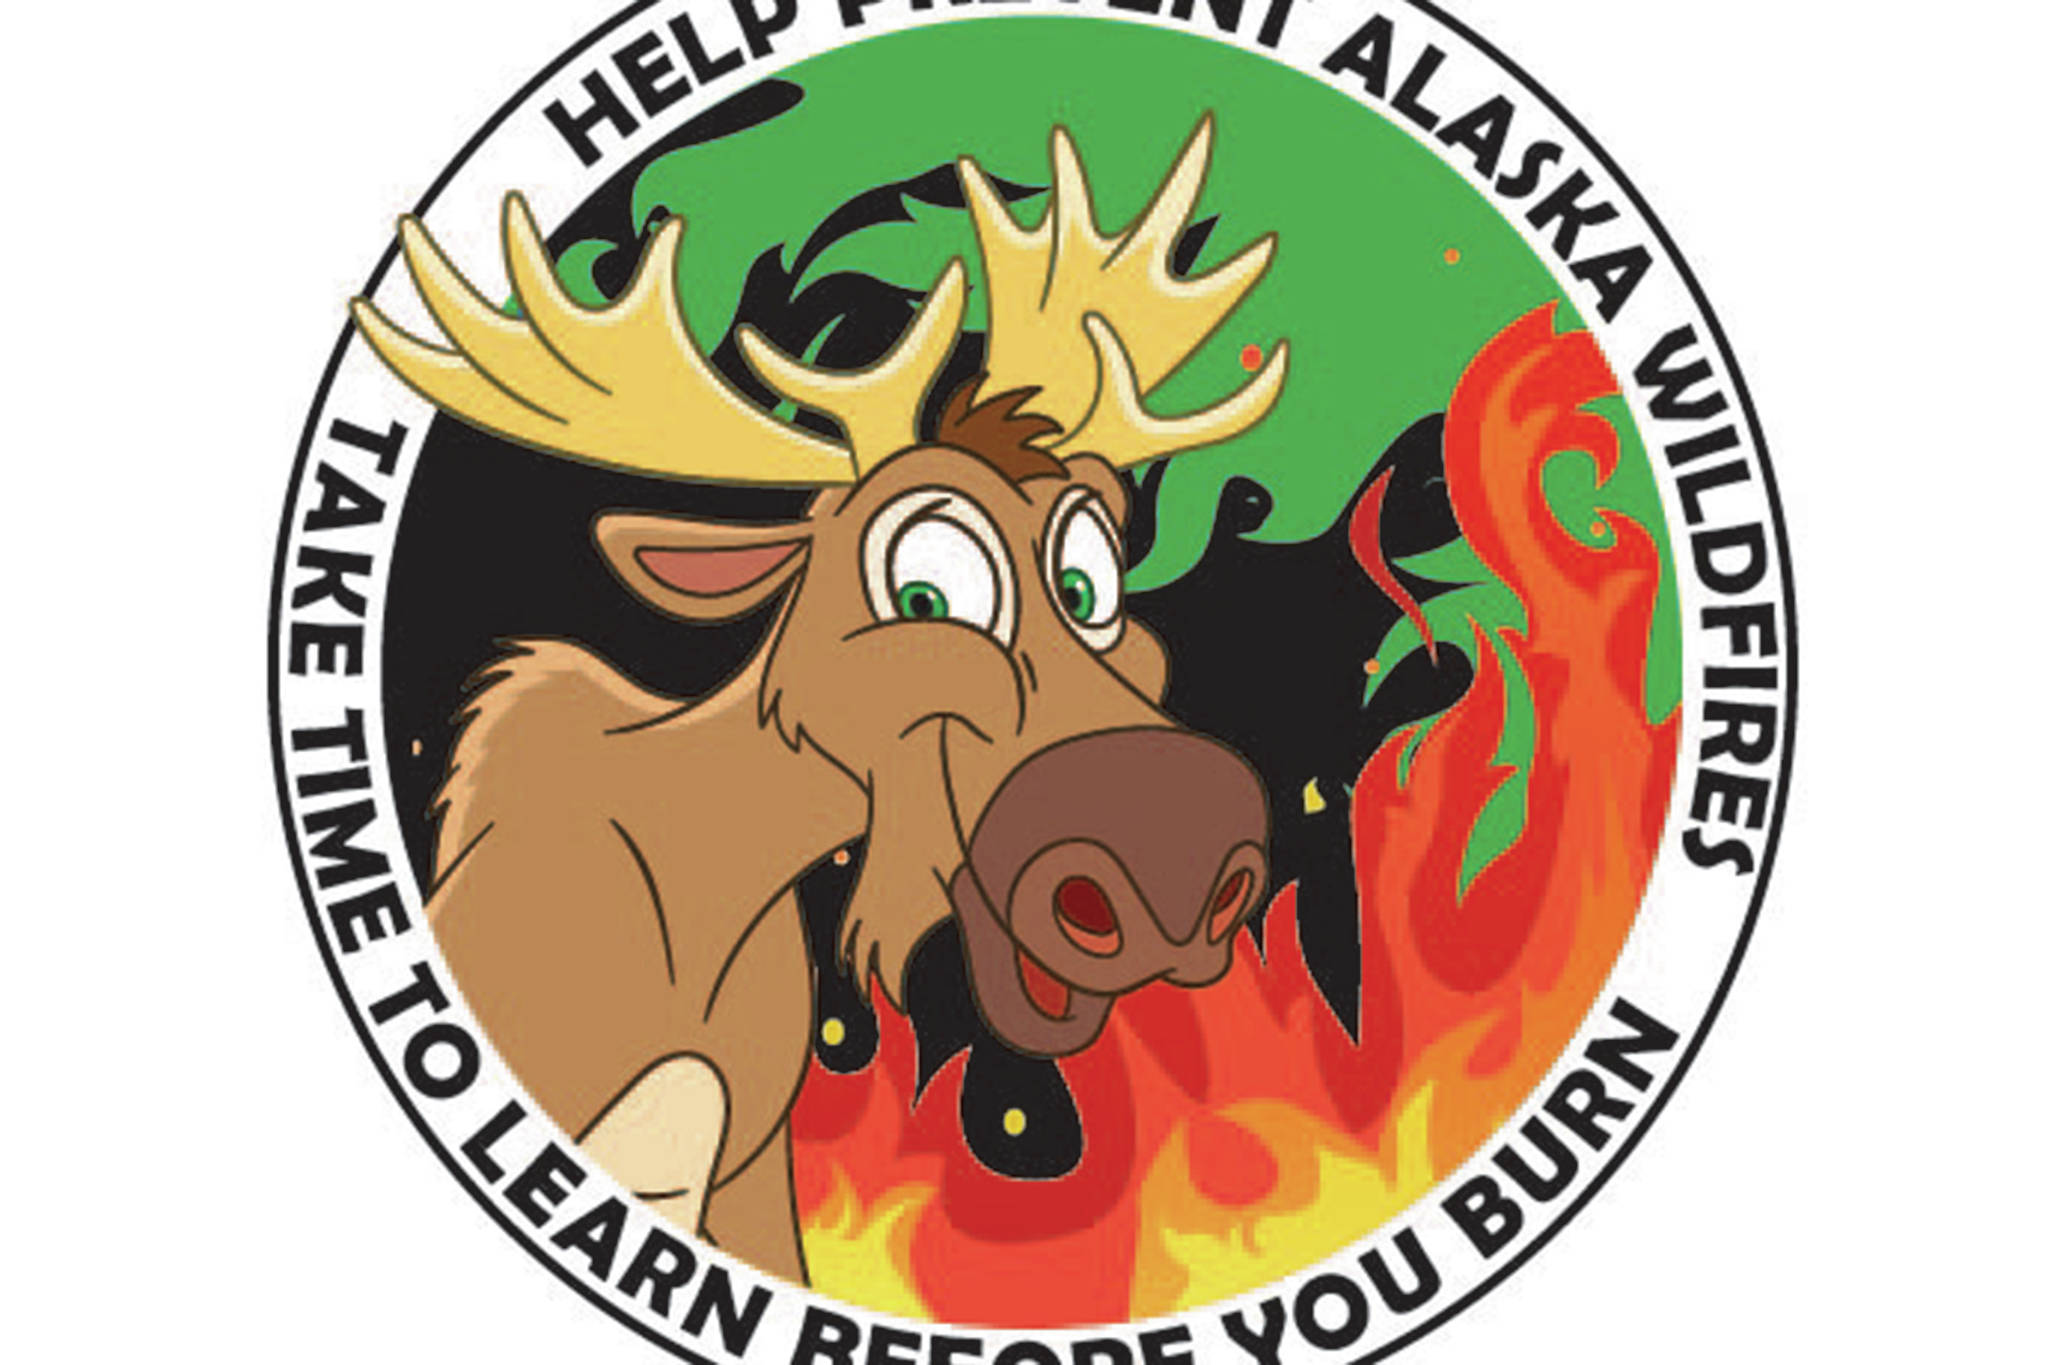 A moose with no name: Contest to be held for new fire-prevention mascot